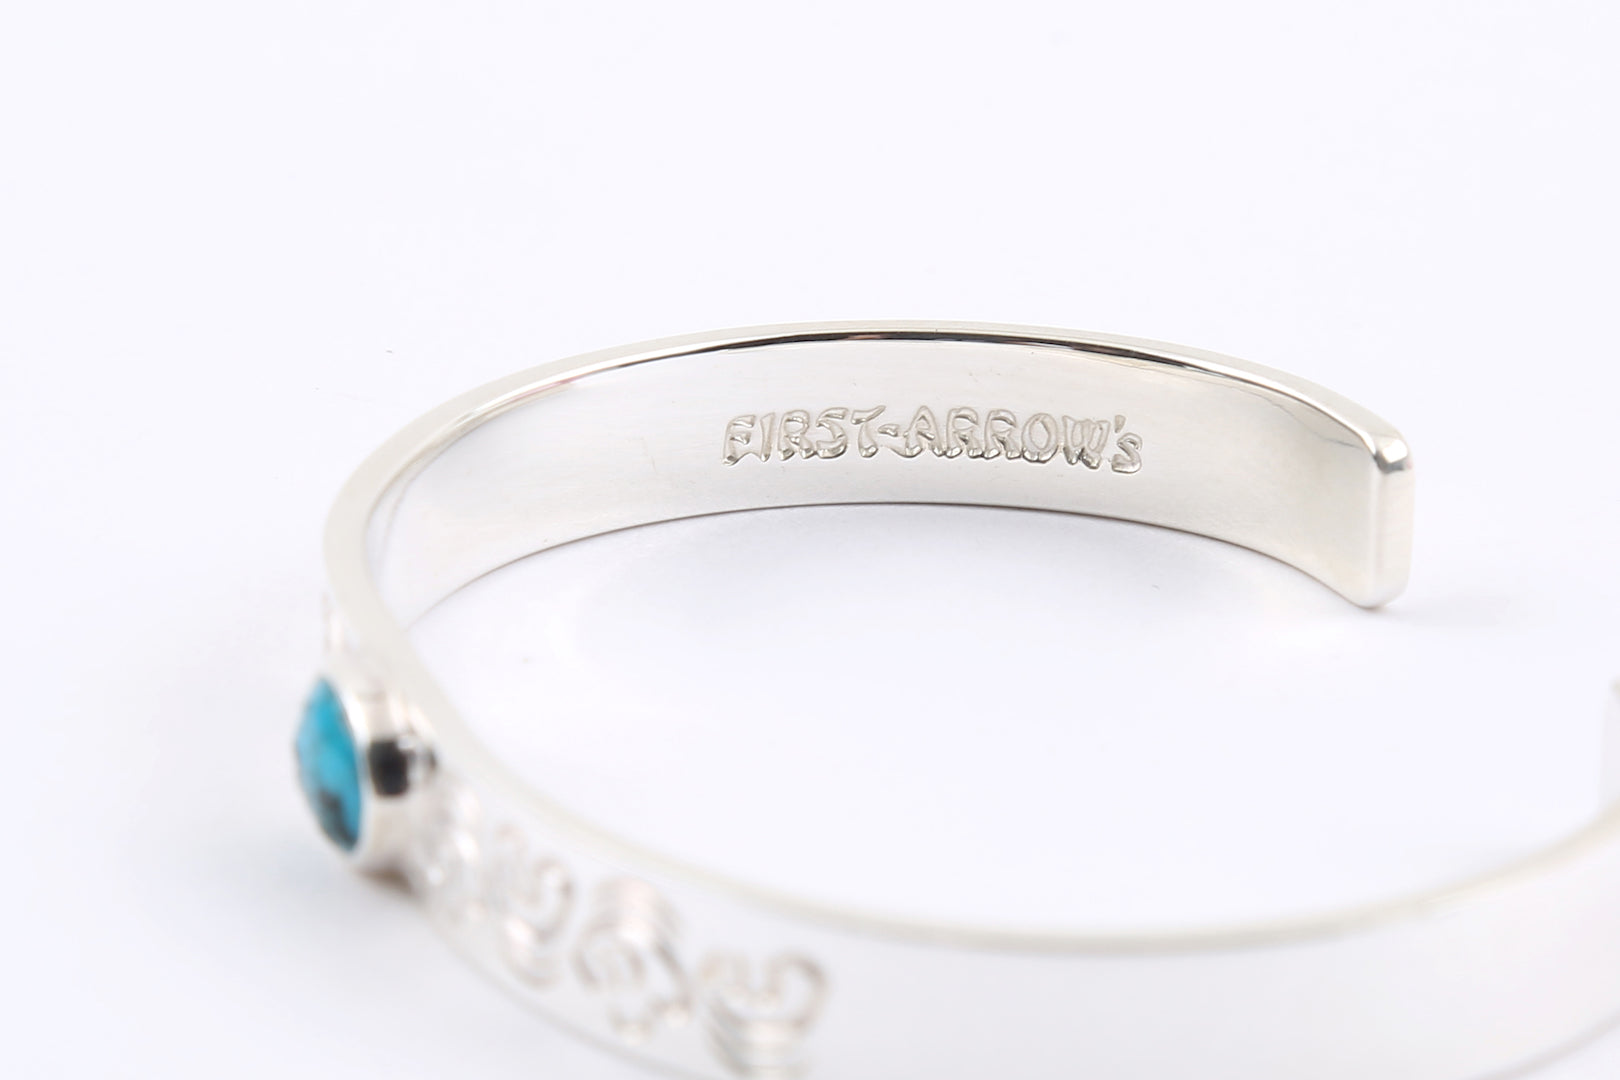 First Arrow's 8mm Arabesque Bangle with Turquoise